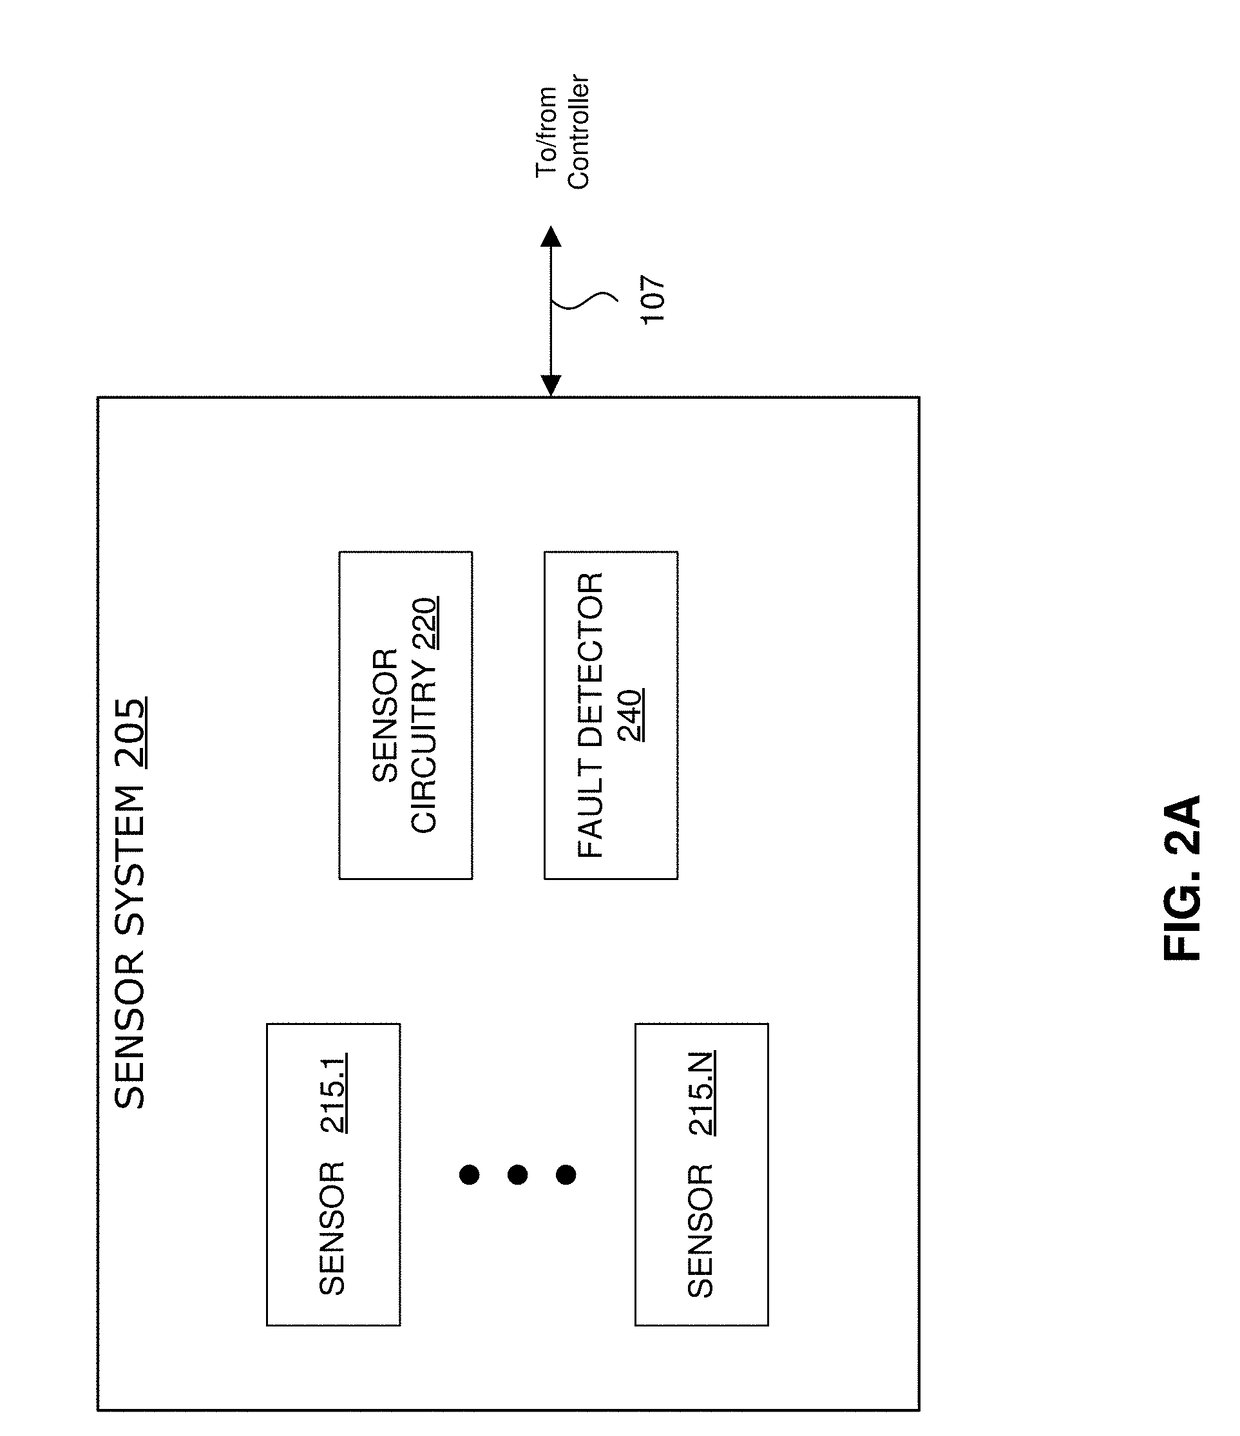 Signal protocol fault detection system and method